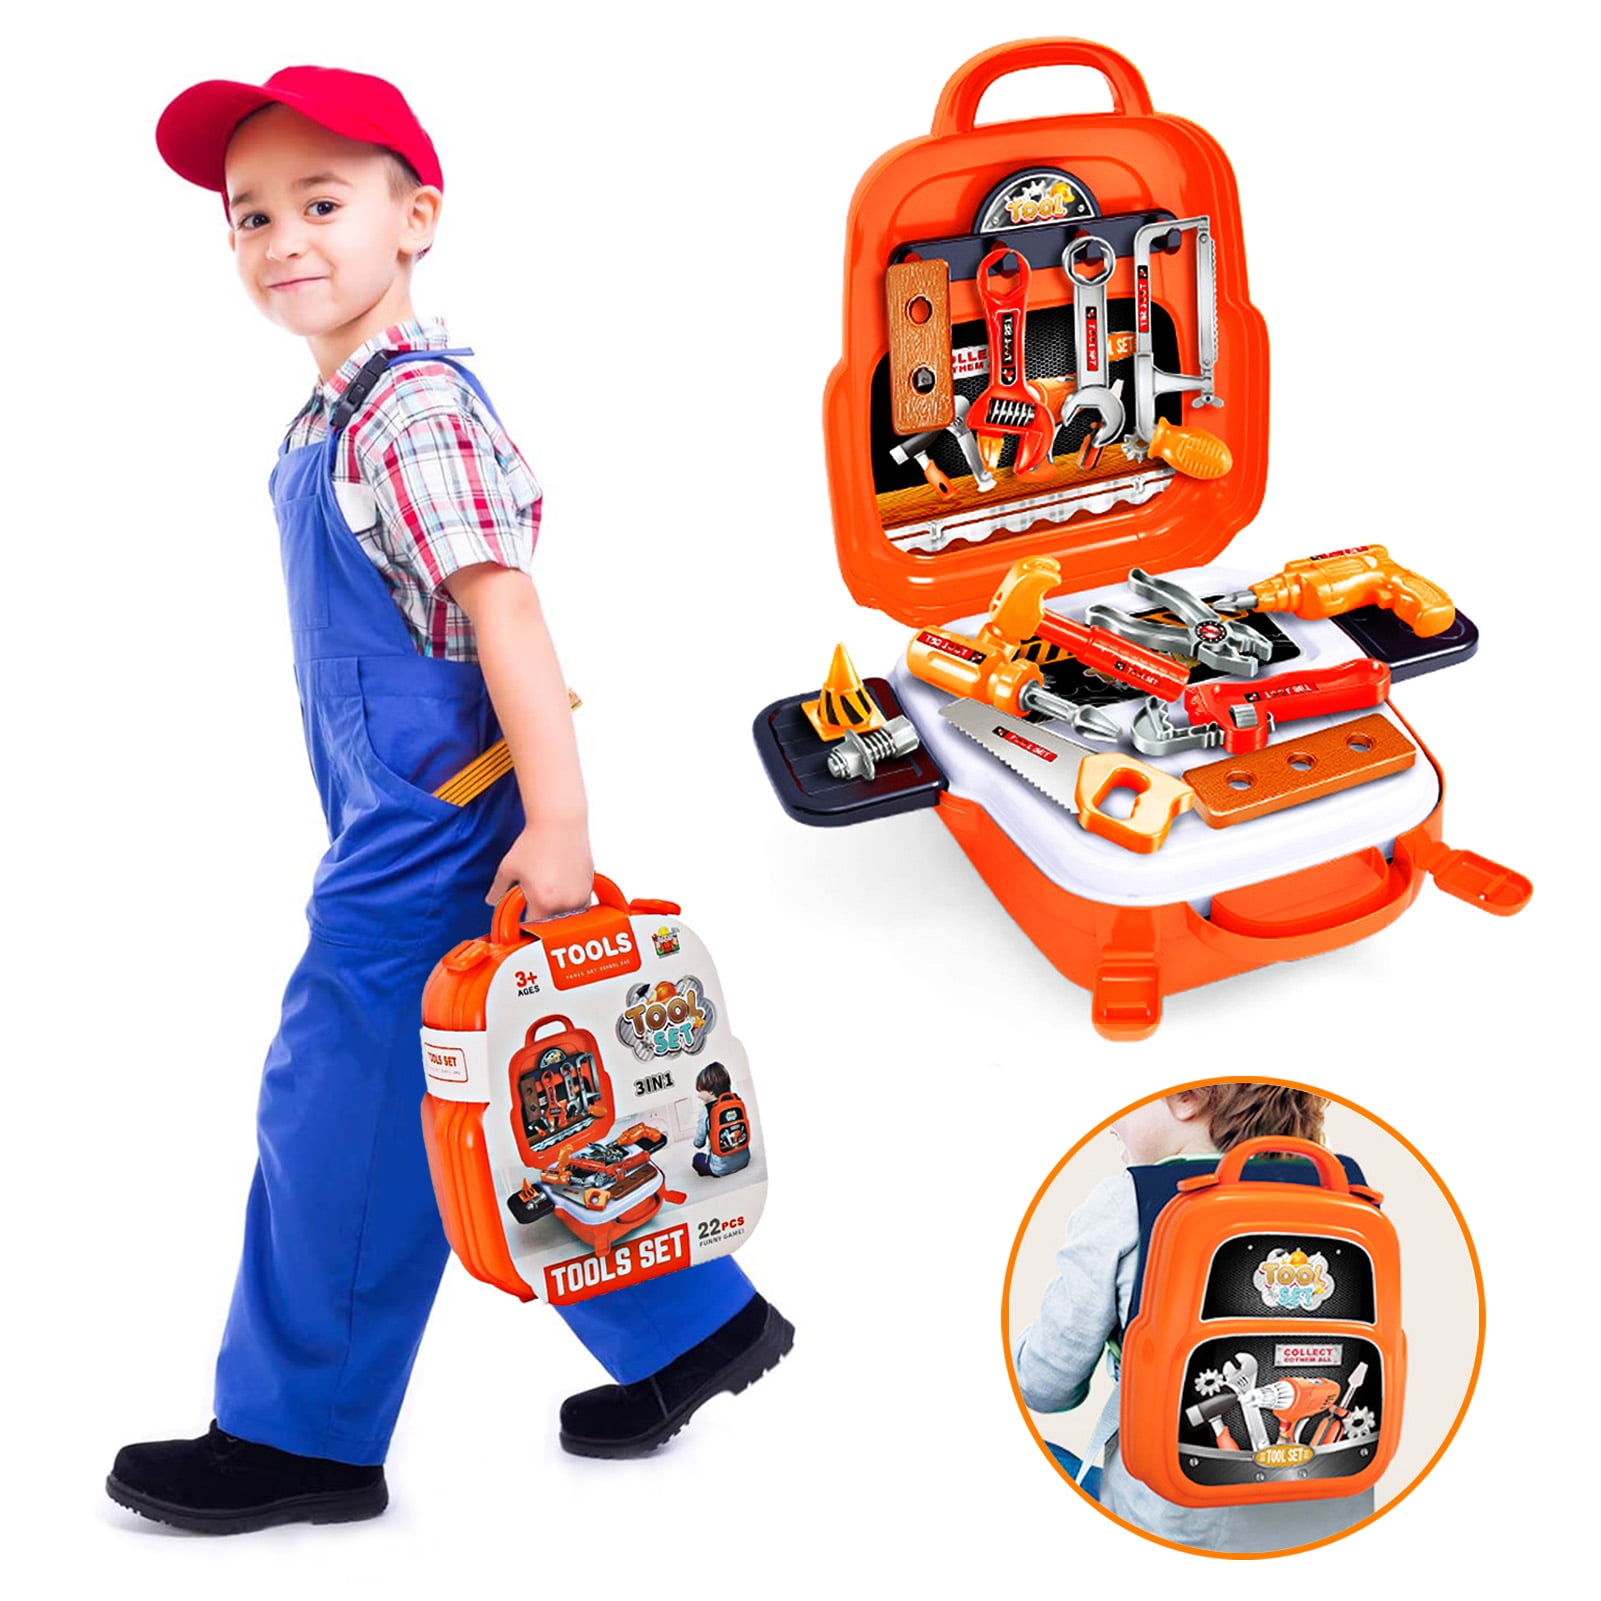 Kids Tool Box Bench Toy Workbench Toddlers Kit Construction Tools Hammer Luggage 